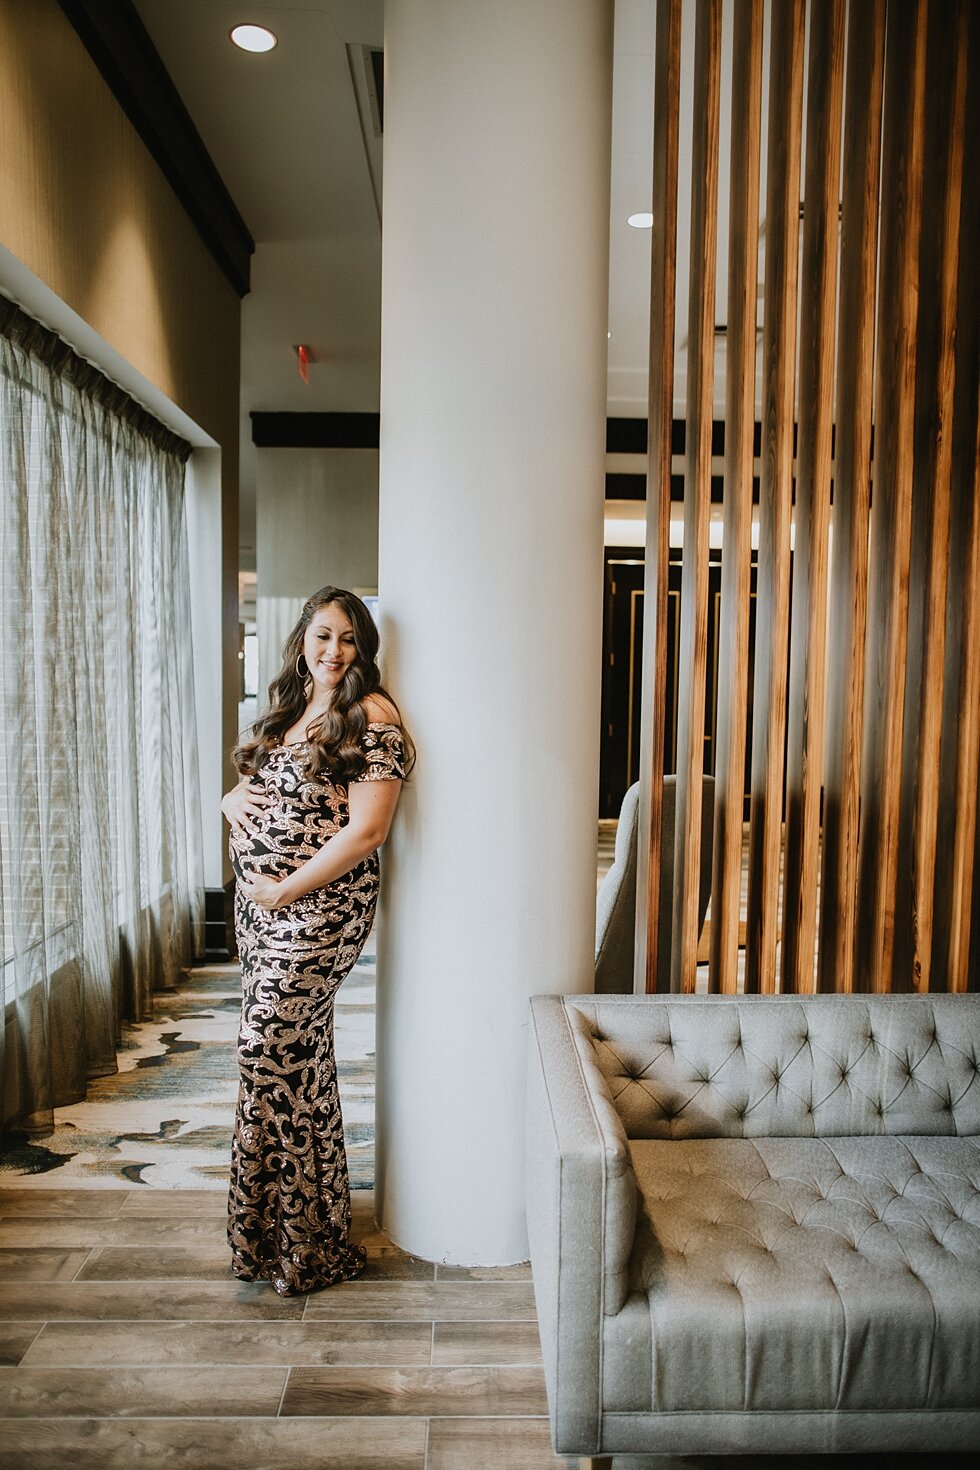  This stunning mother is cradling her belly in these elegant maternity photos as she absolutely exudes grace. #maternitygoals #maternityphotographer #babybump #kentuckyphotographer #fancymaternitysession #modernmaternitysession #urbanmaternitysession